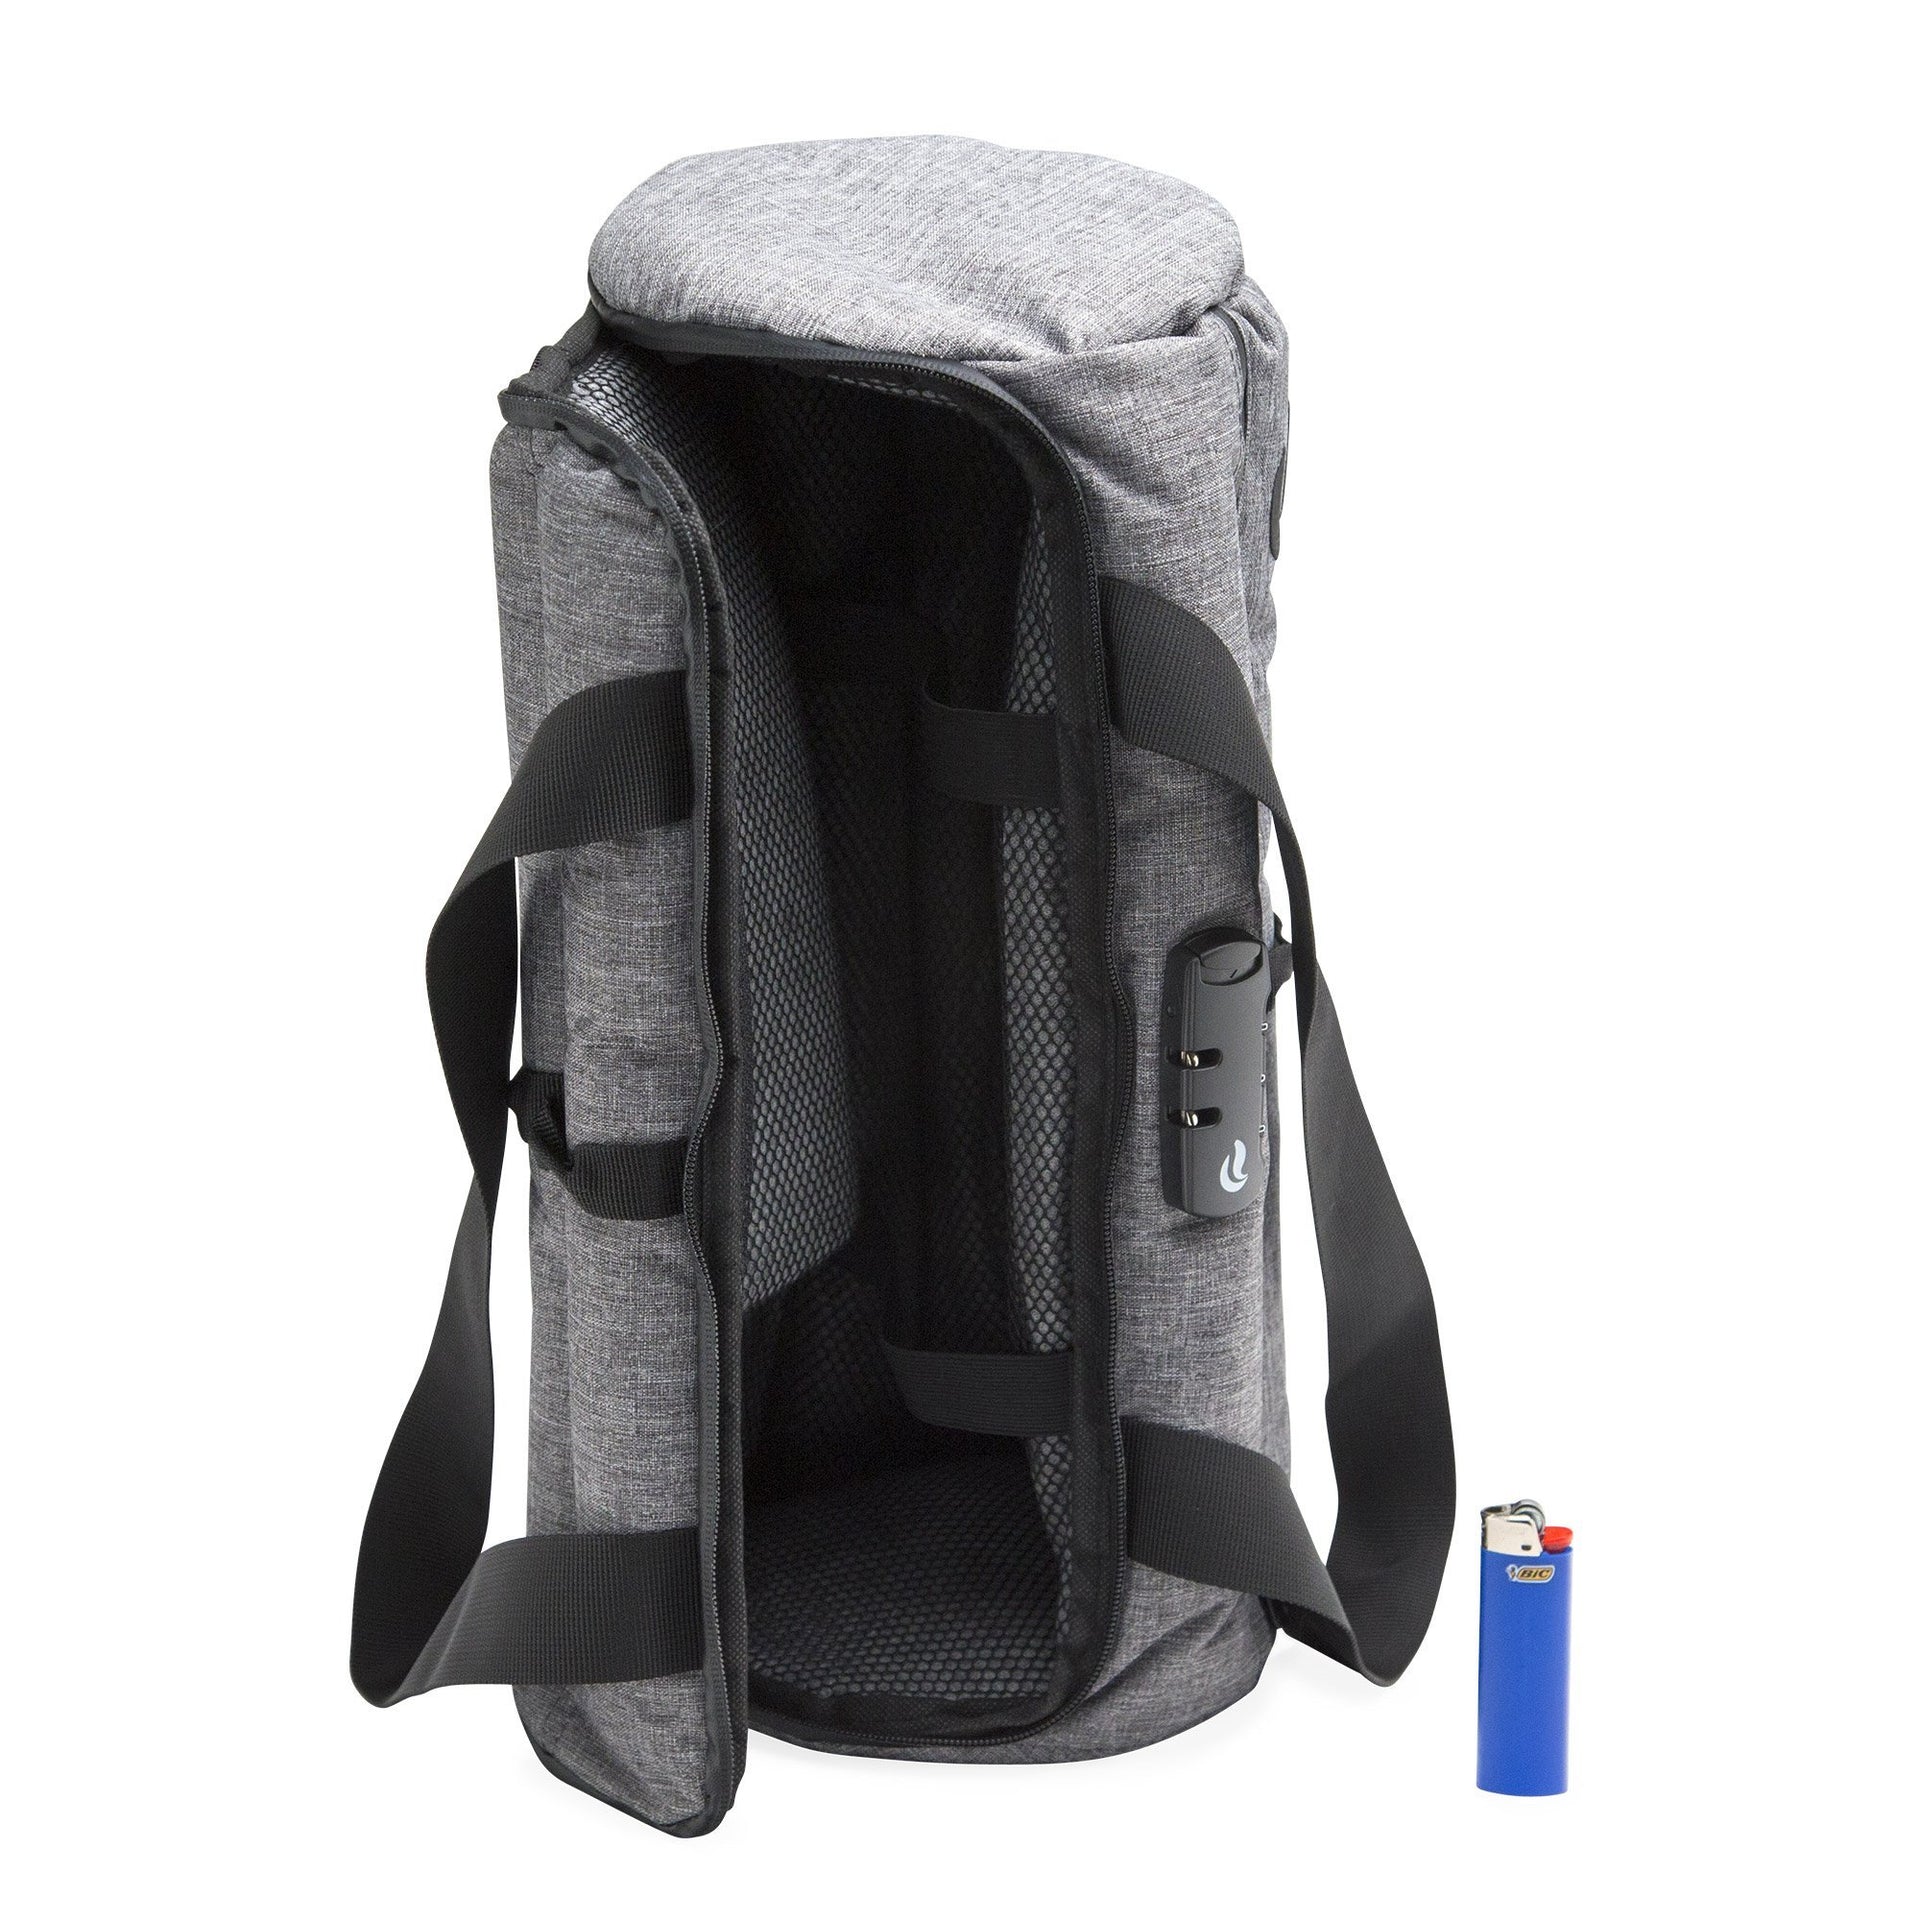 Skunk Smell Proof Combo Lock Mini Backpack / $ 58.99 at 420 Science